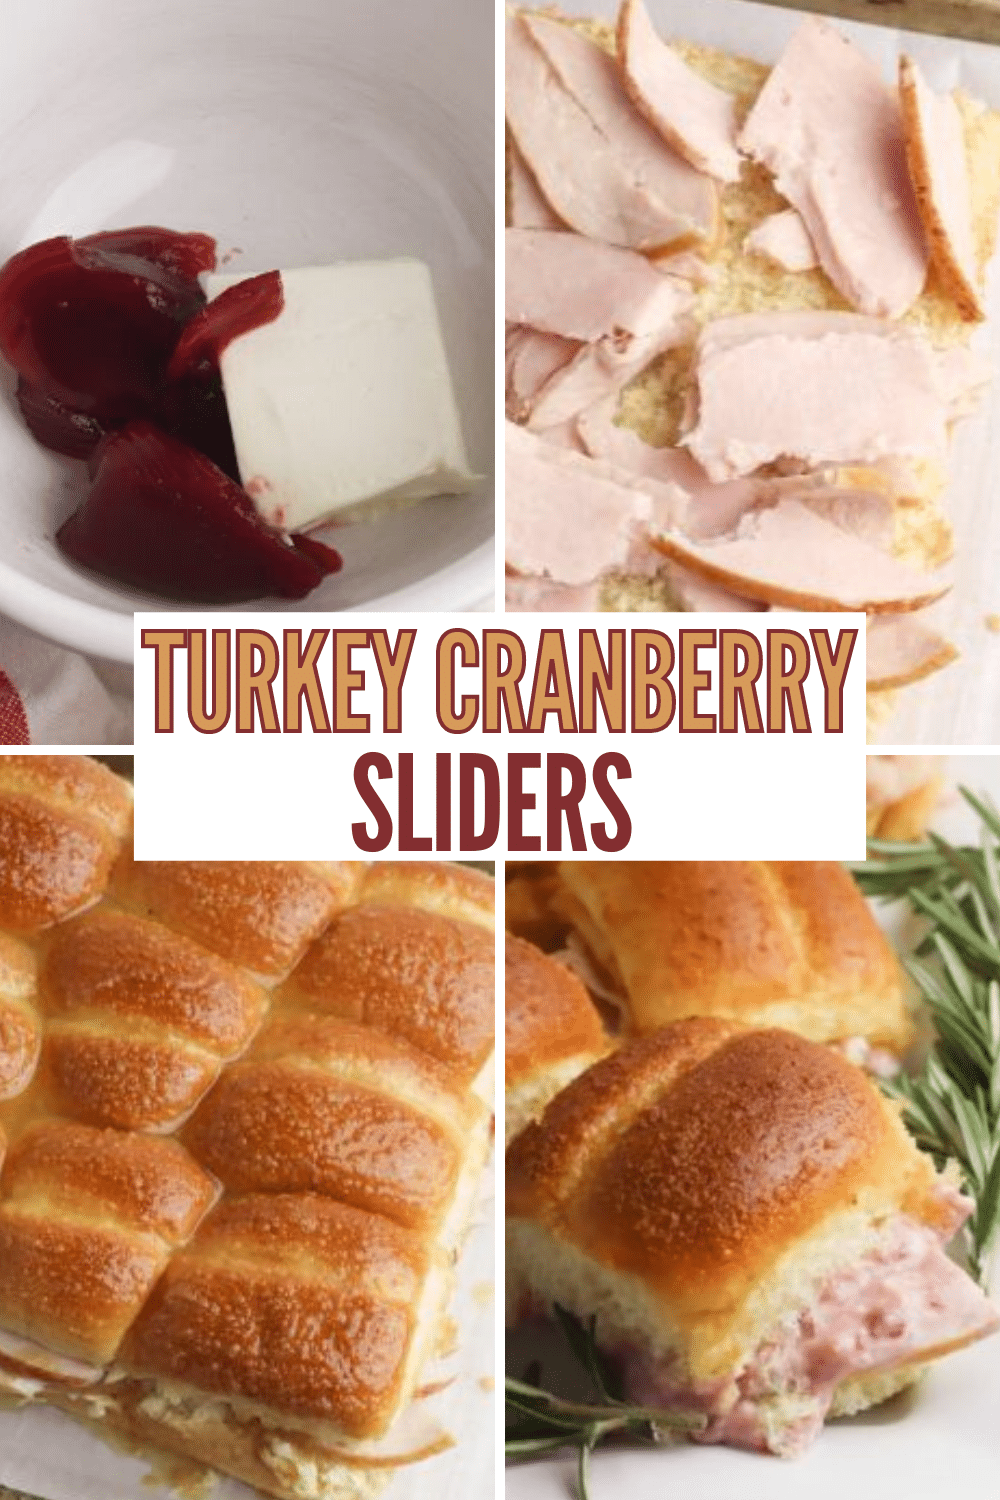 Turkey cranberry sliders are bite-sized sandwiches made with tender turkey and tangy cranberry sauce. These delightful sliders are perfect for holiday gatherings, parties, or simply as a delicious snack. Each slider is